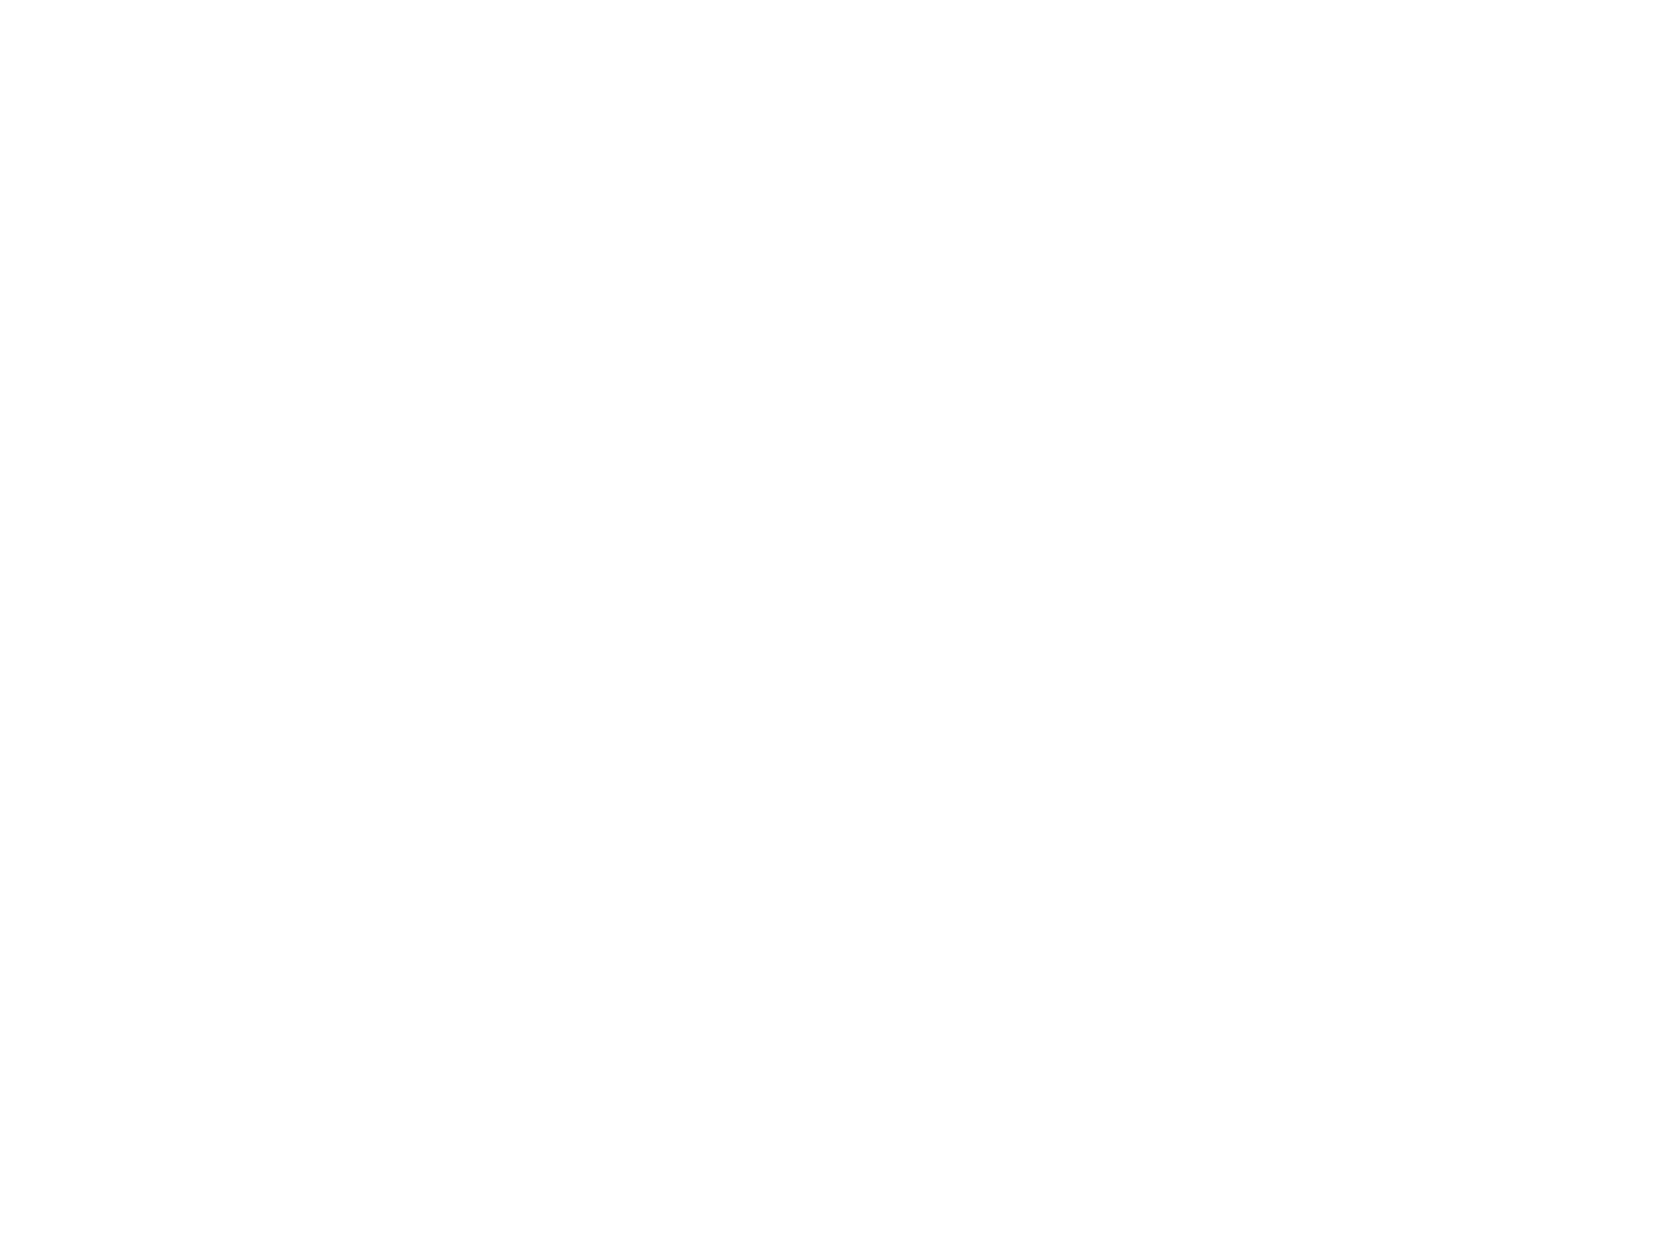 Tumbling T Leather and Wood Creations